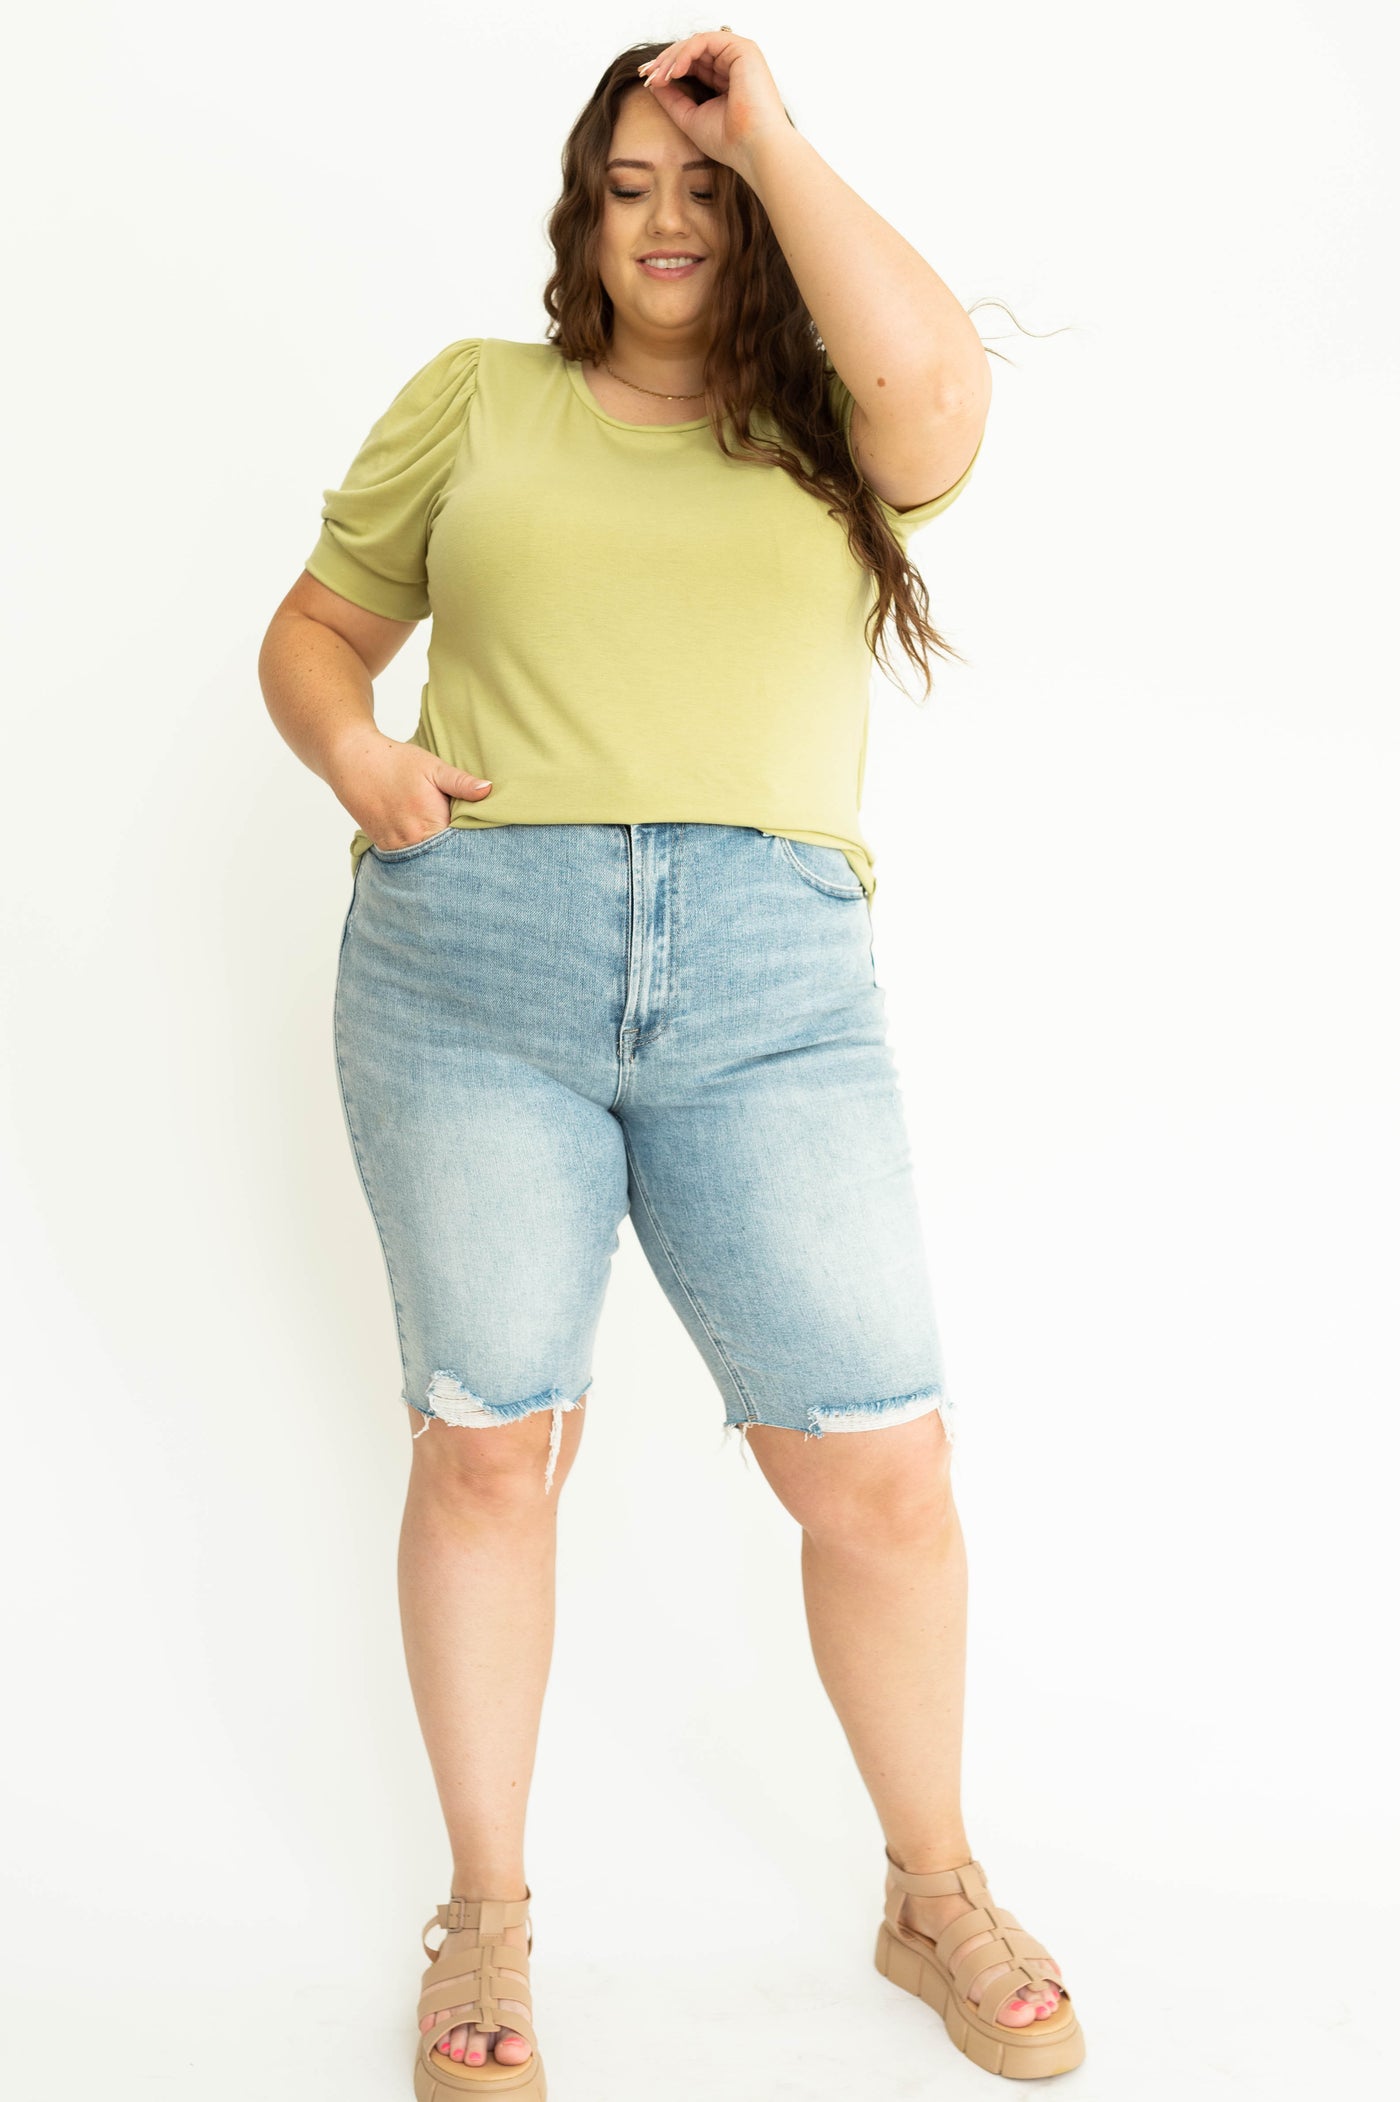 Kiwi colored plus size top with cuffs